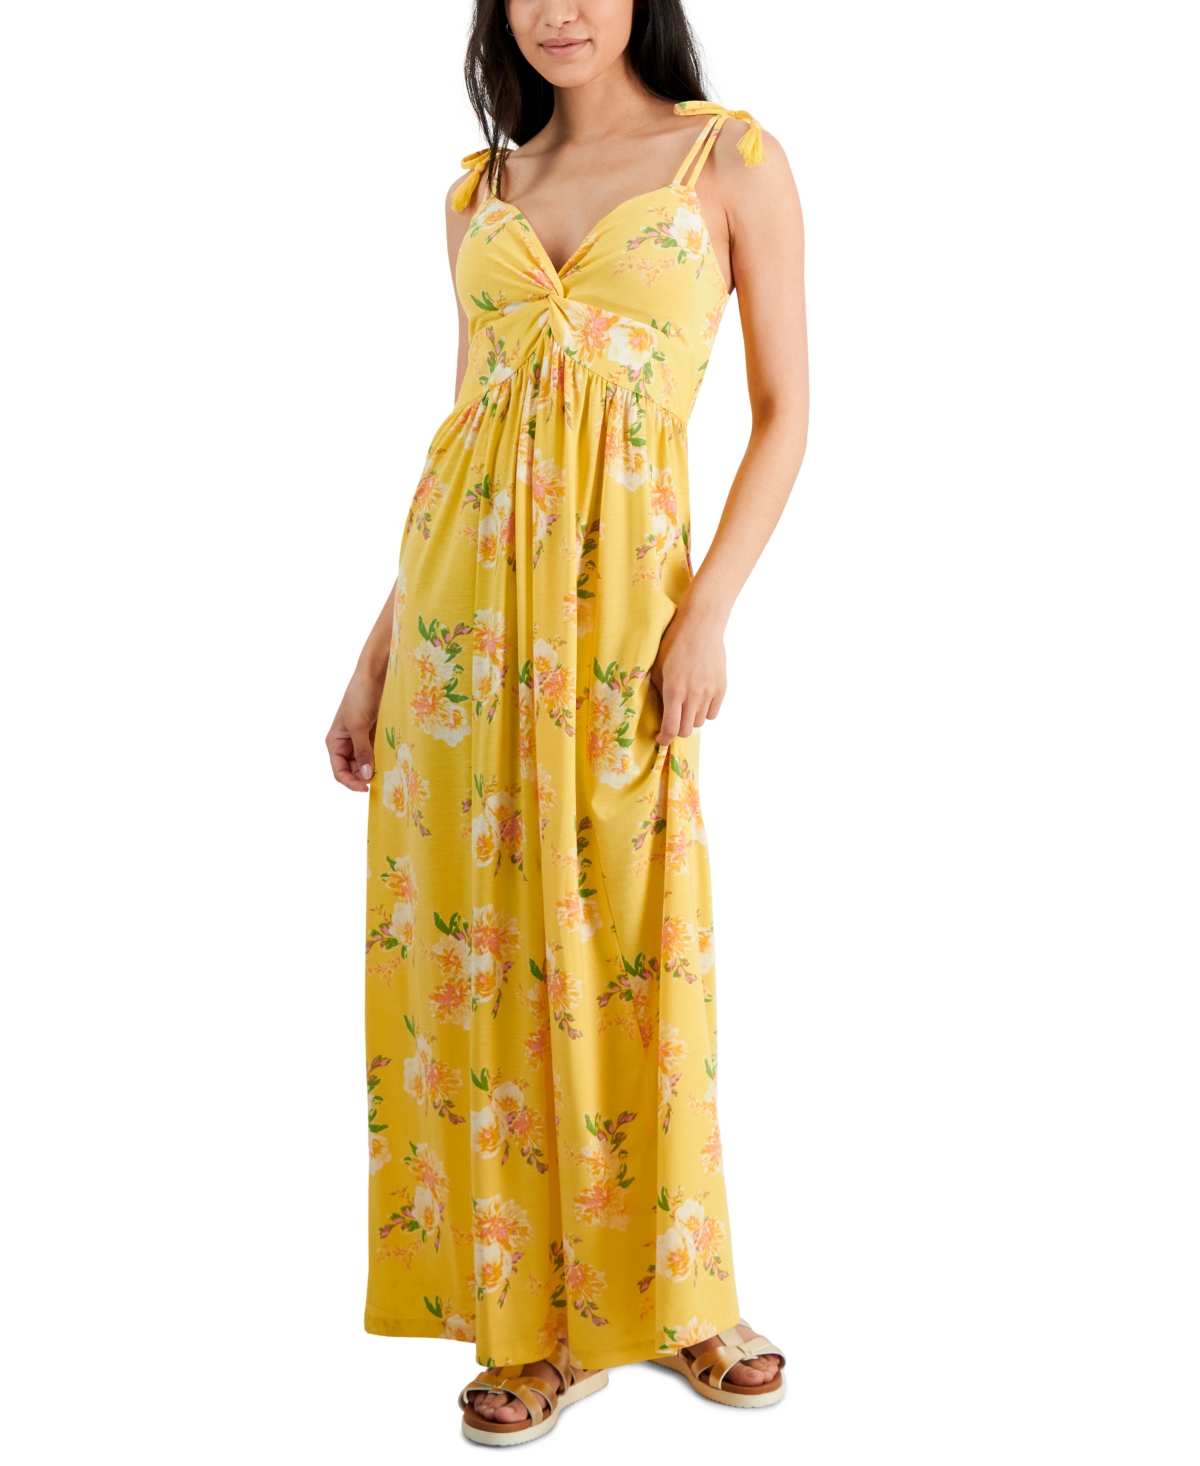 Petite Shoulder-Tie Twist-Front Maxi Dress - Yellow Green Small Floral